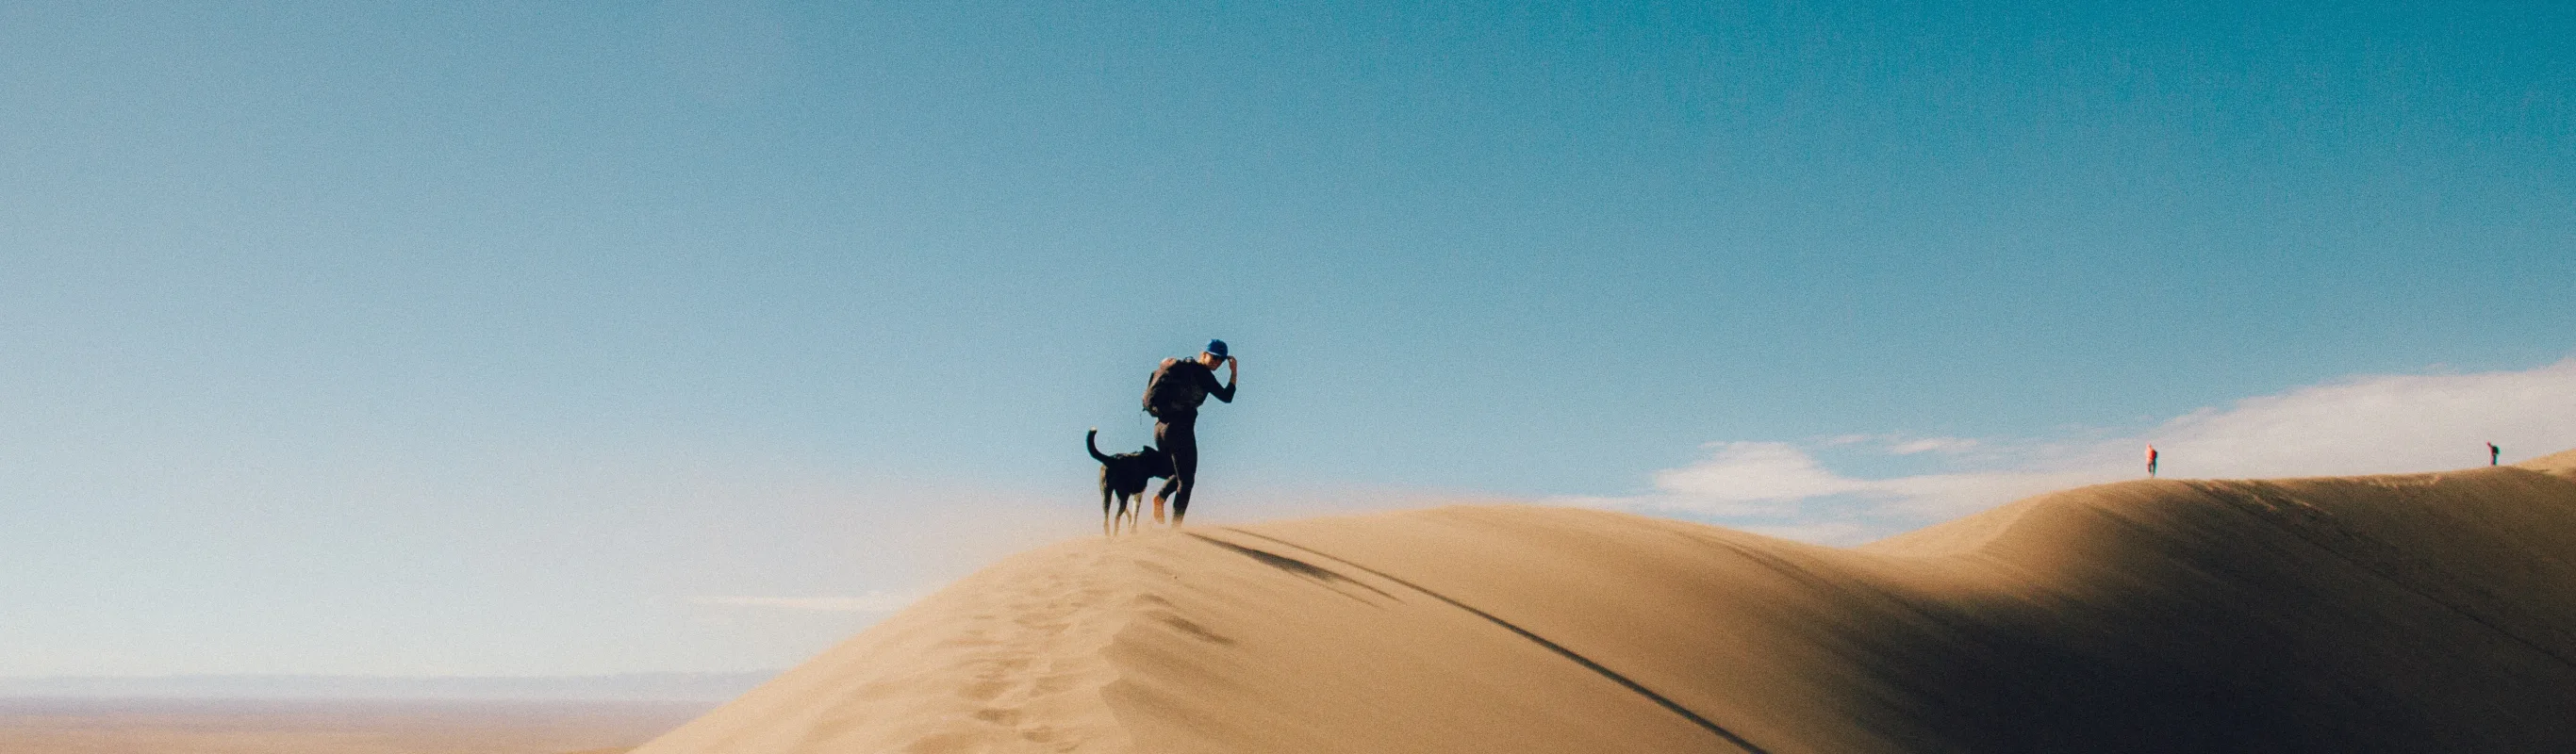 Man and dog on the sand dune